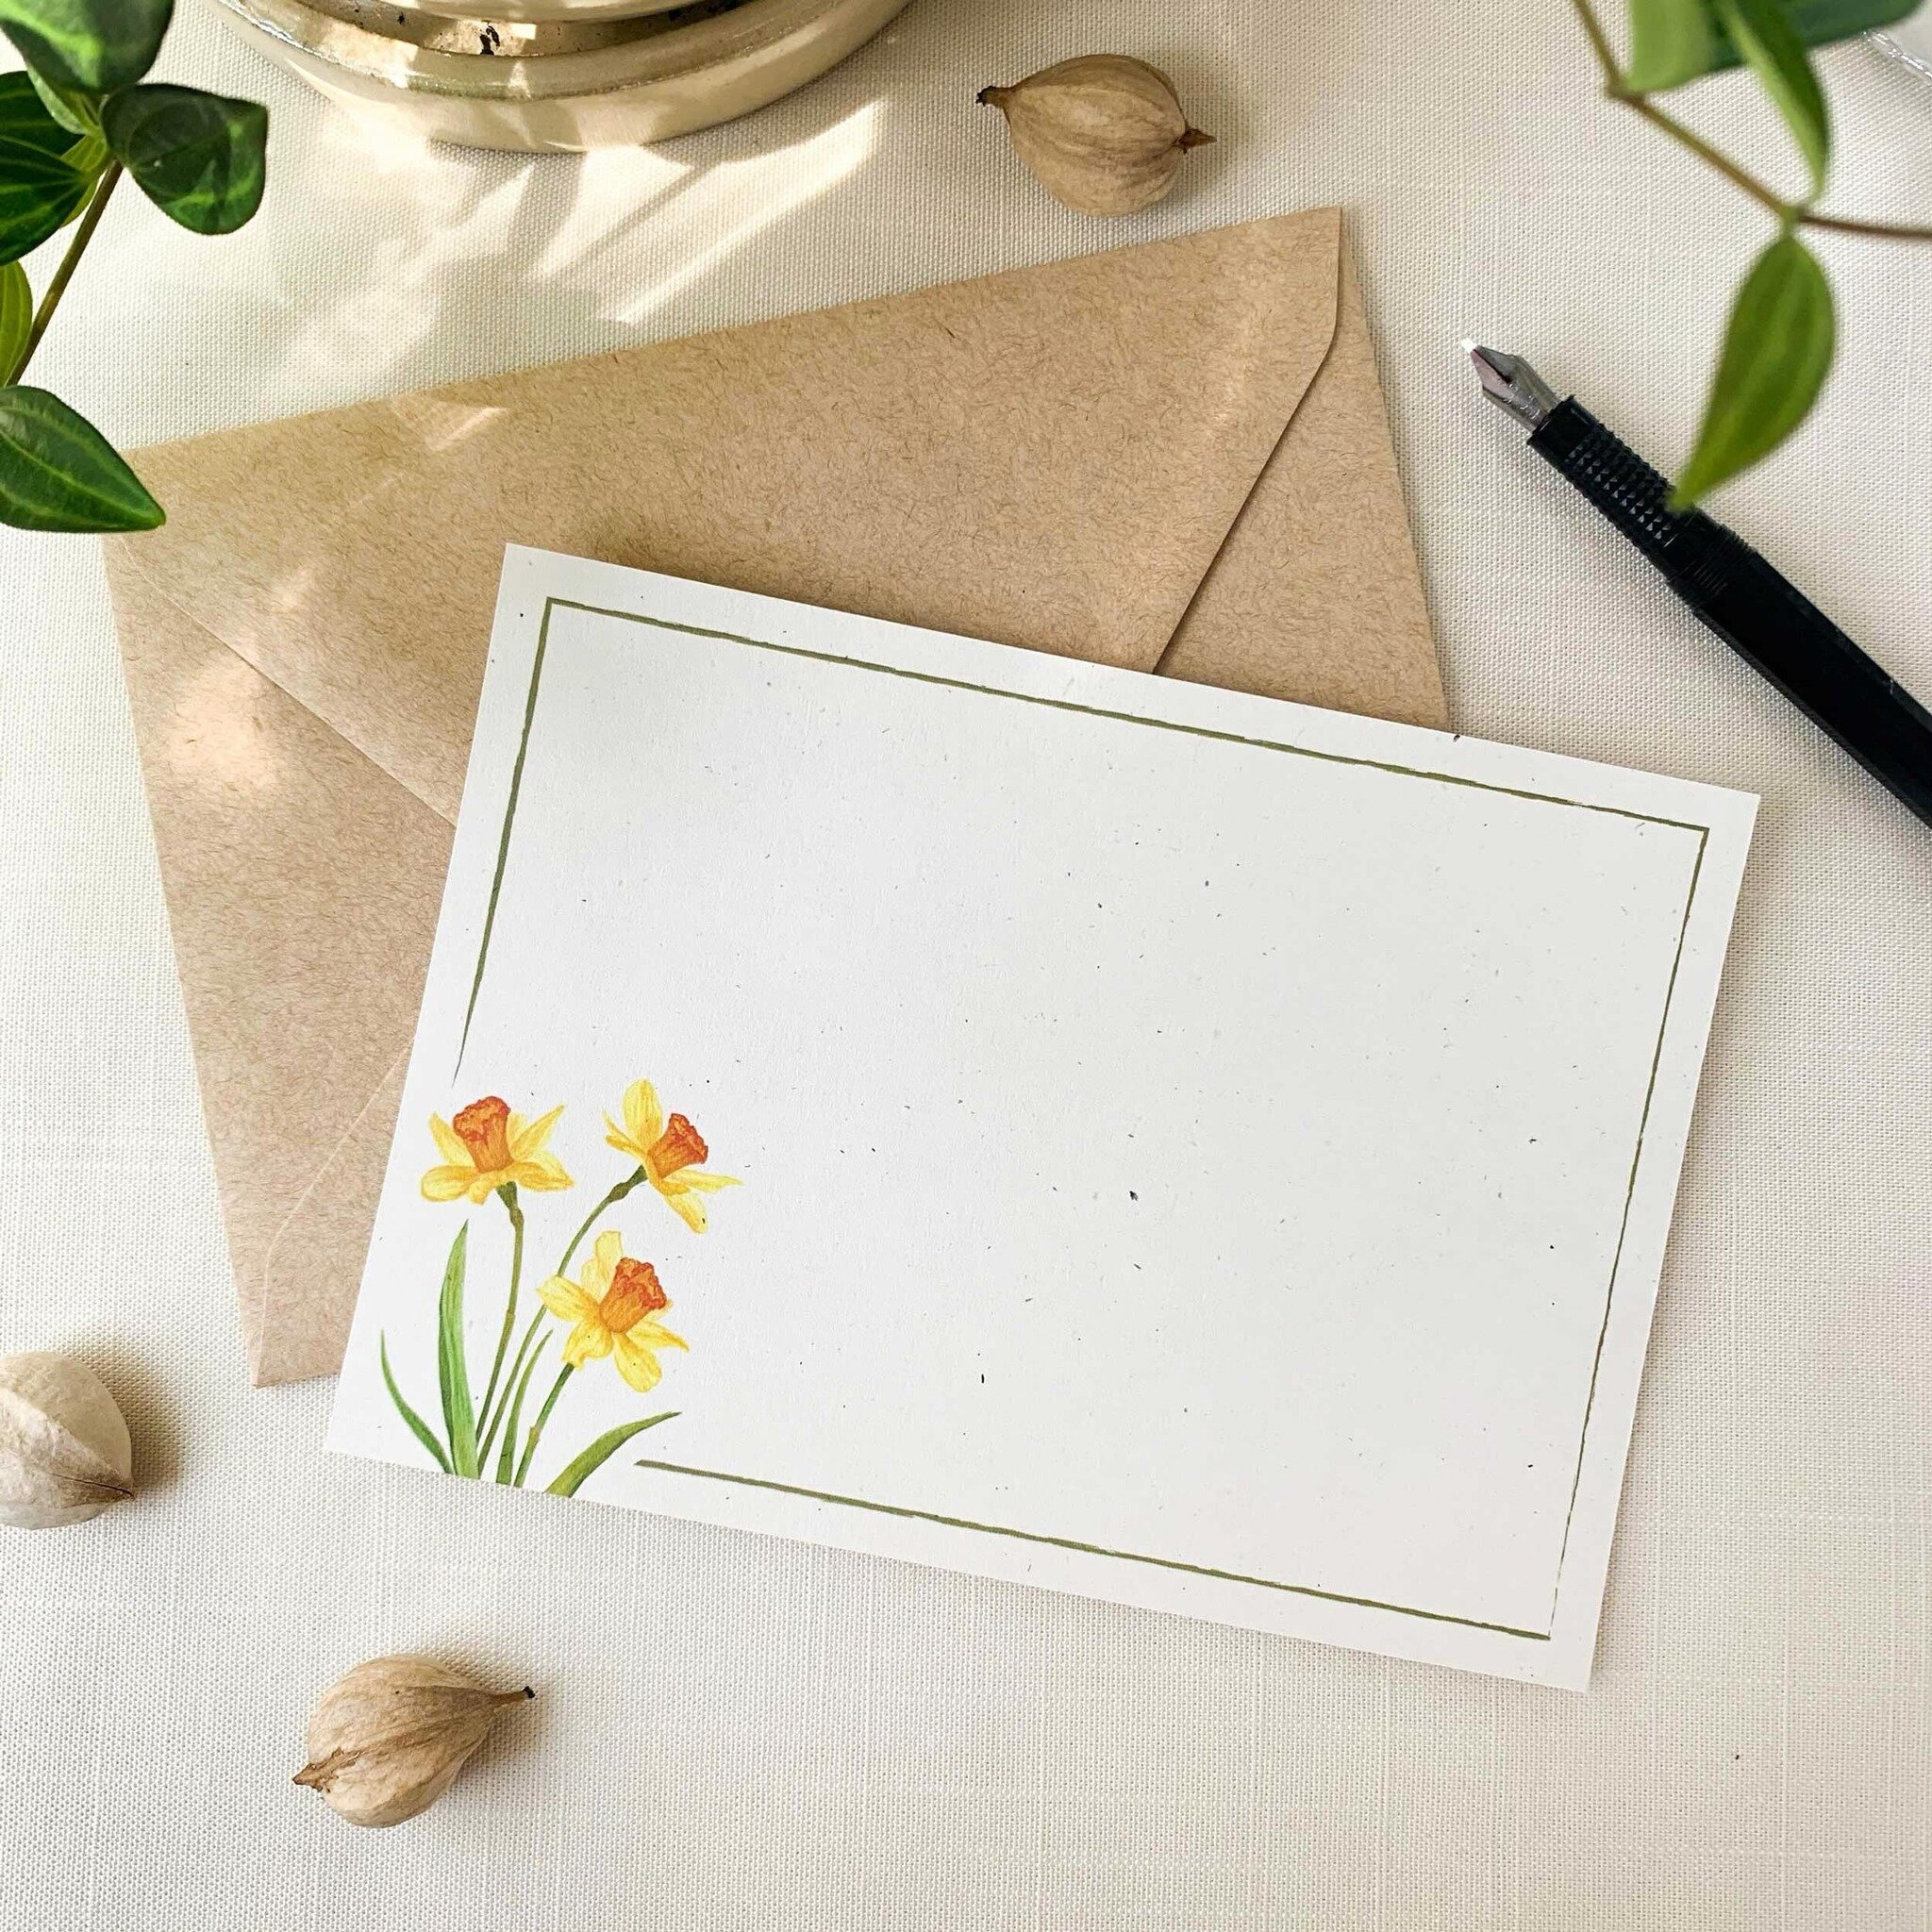 Daffodils notecard set. All my stationery is printed on recycled paper in eco friendly packaging.
#daffodils #springflowers #stationery #stationerylover #stationeryshop #recycledpaper #ecofriendlygifts #giftsforher #notecards #inspiredbypetals #snail